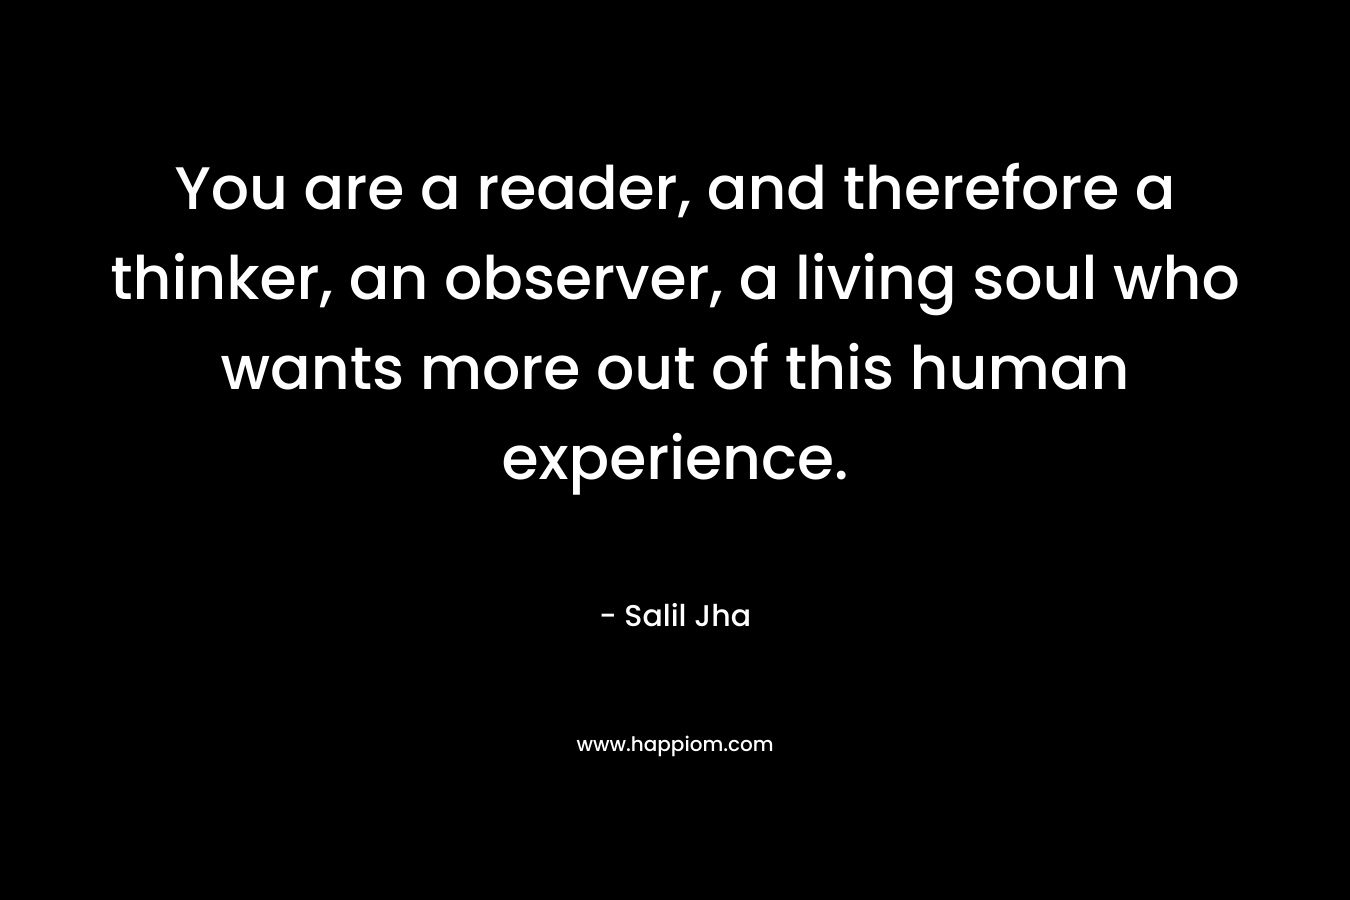 You are a reader, and therefore a thinker, an observer, a living soul who wants more out of this human experience. – Salil Jha